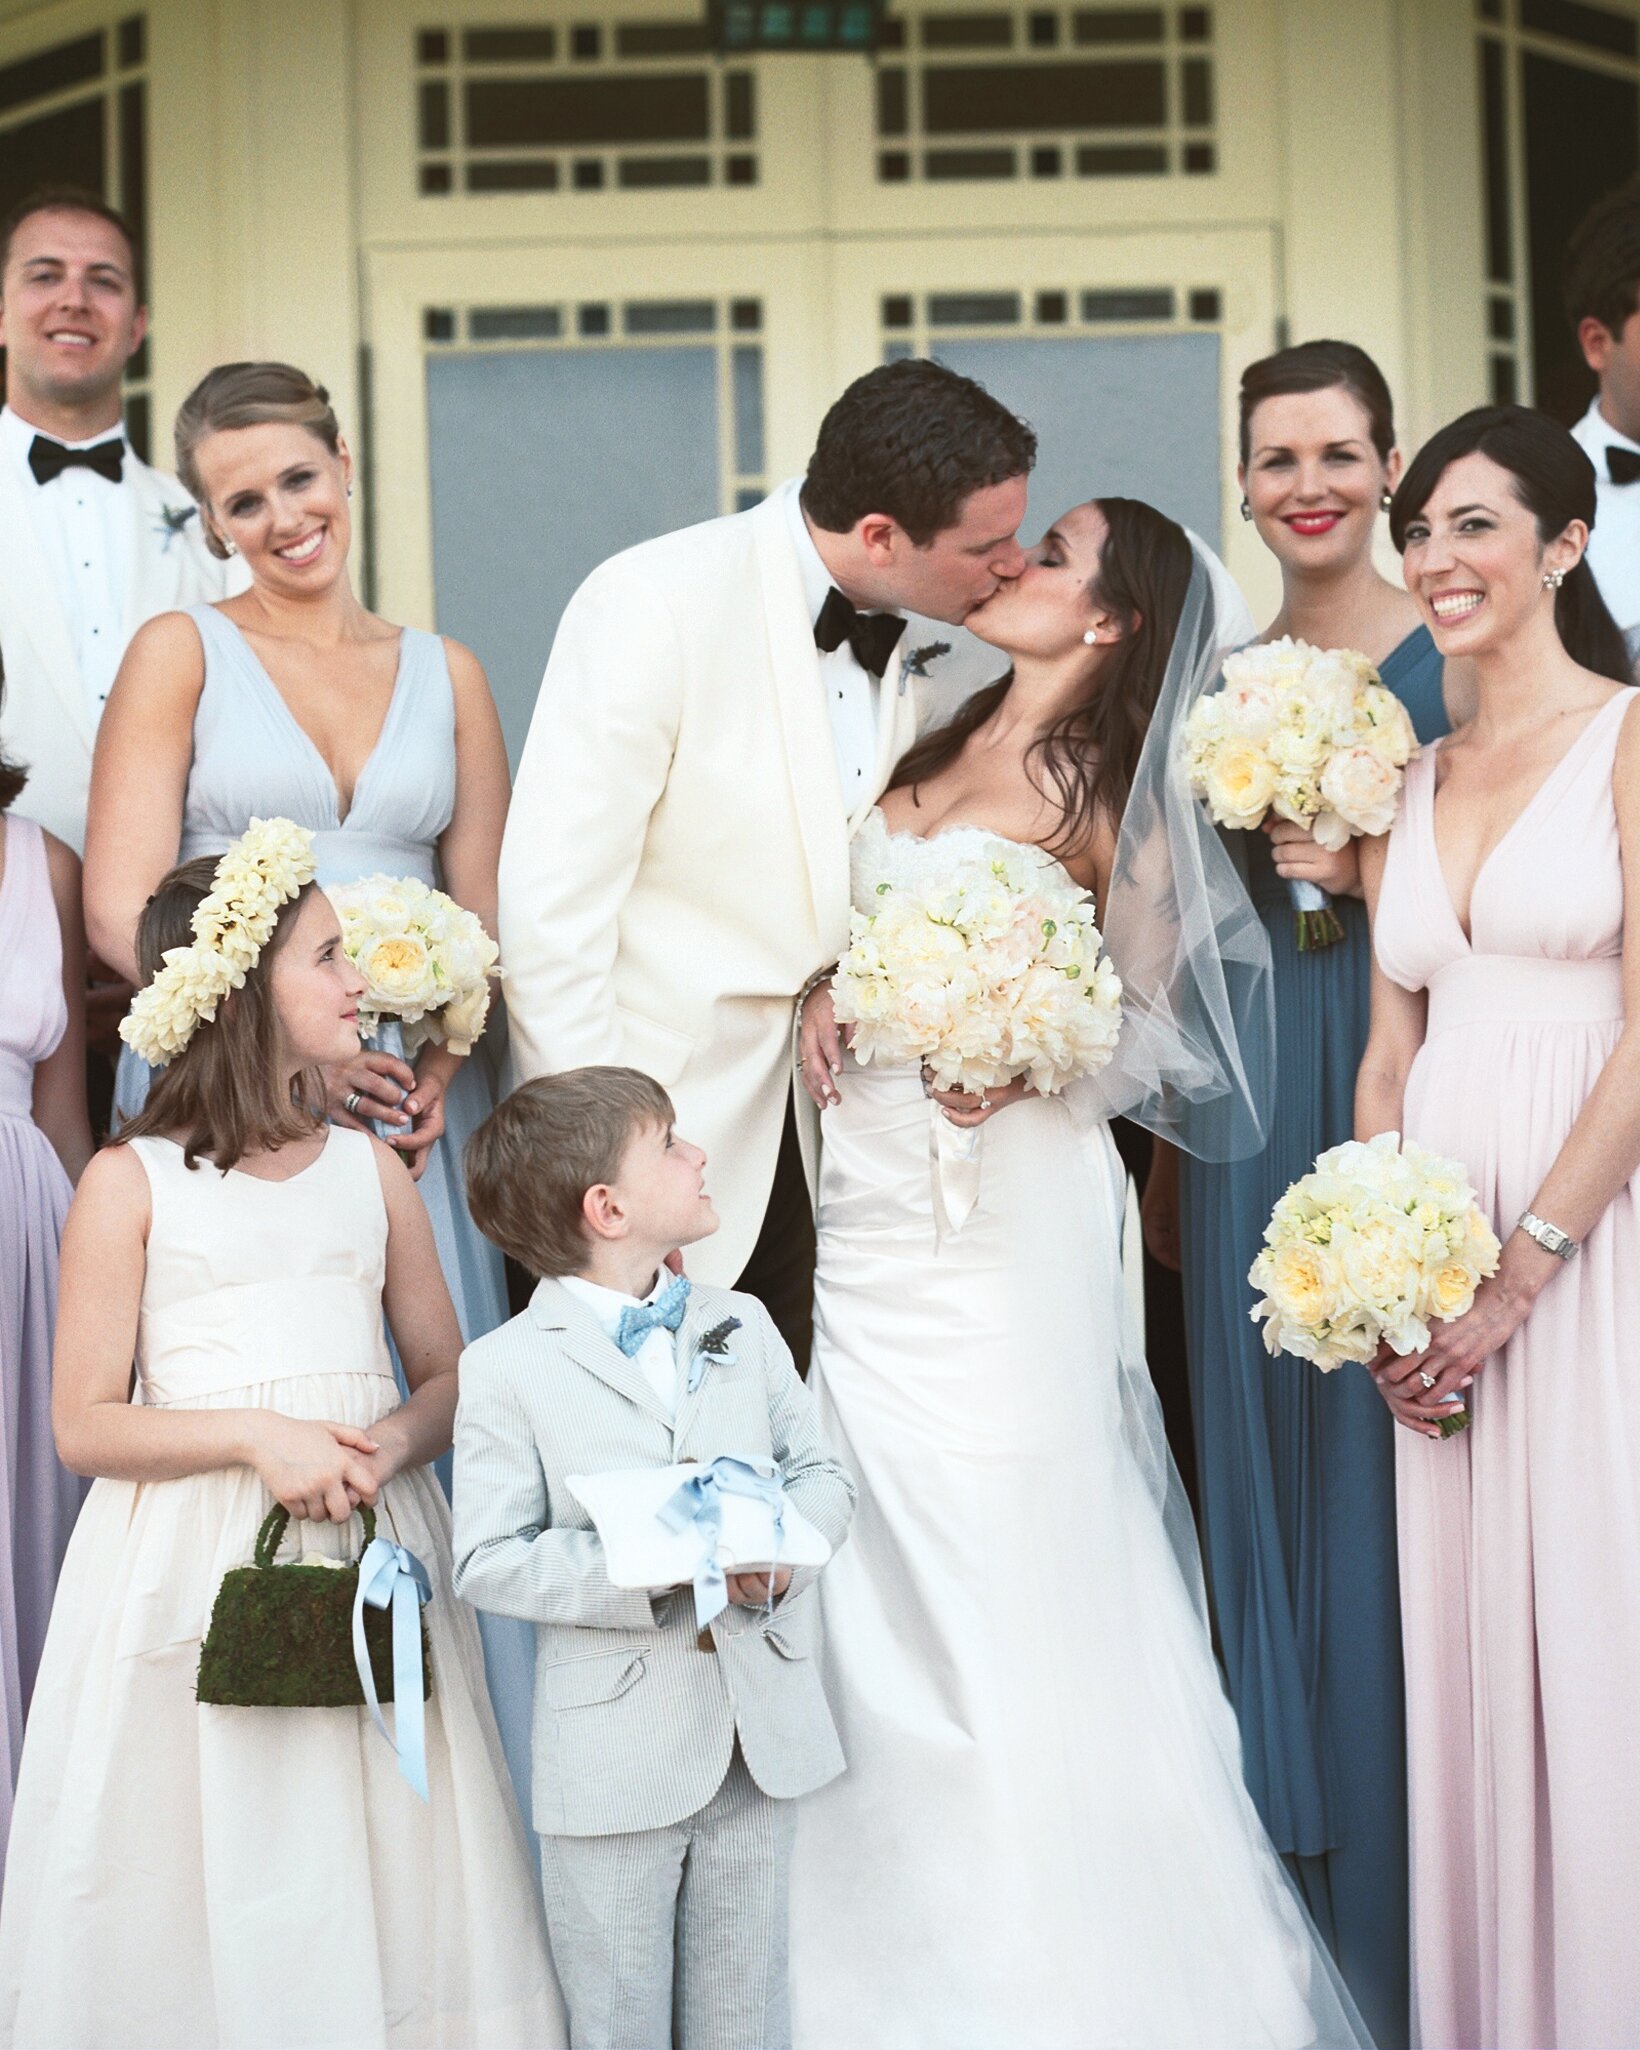 A Traditional Outdoor Lavender Colored Destination Wedding In